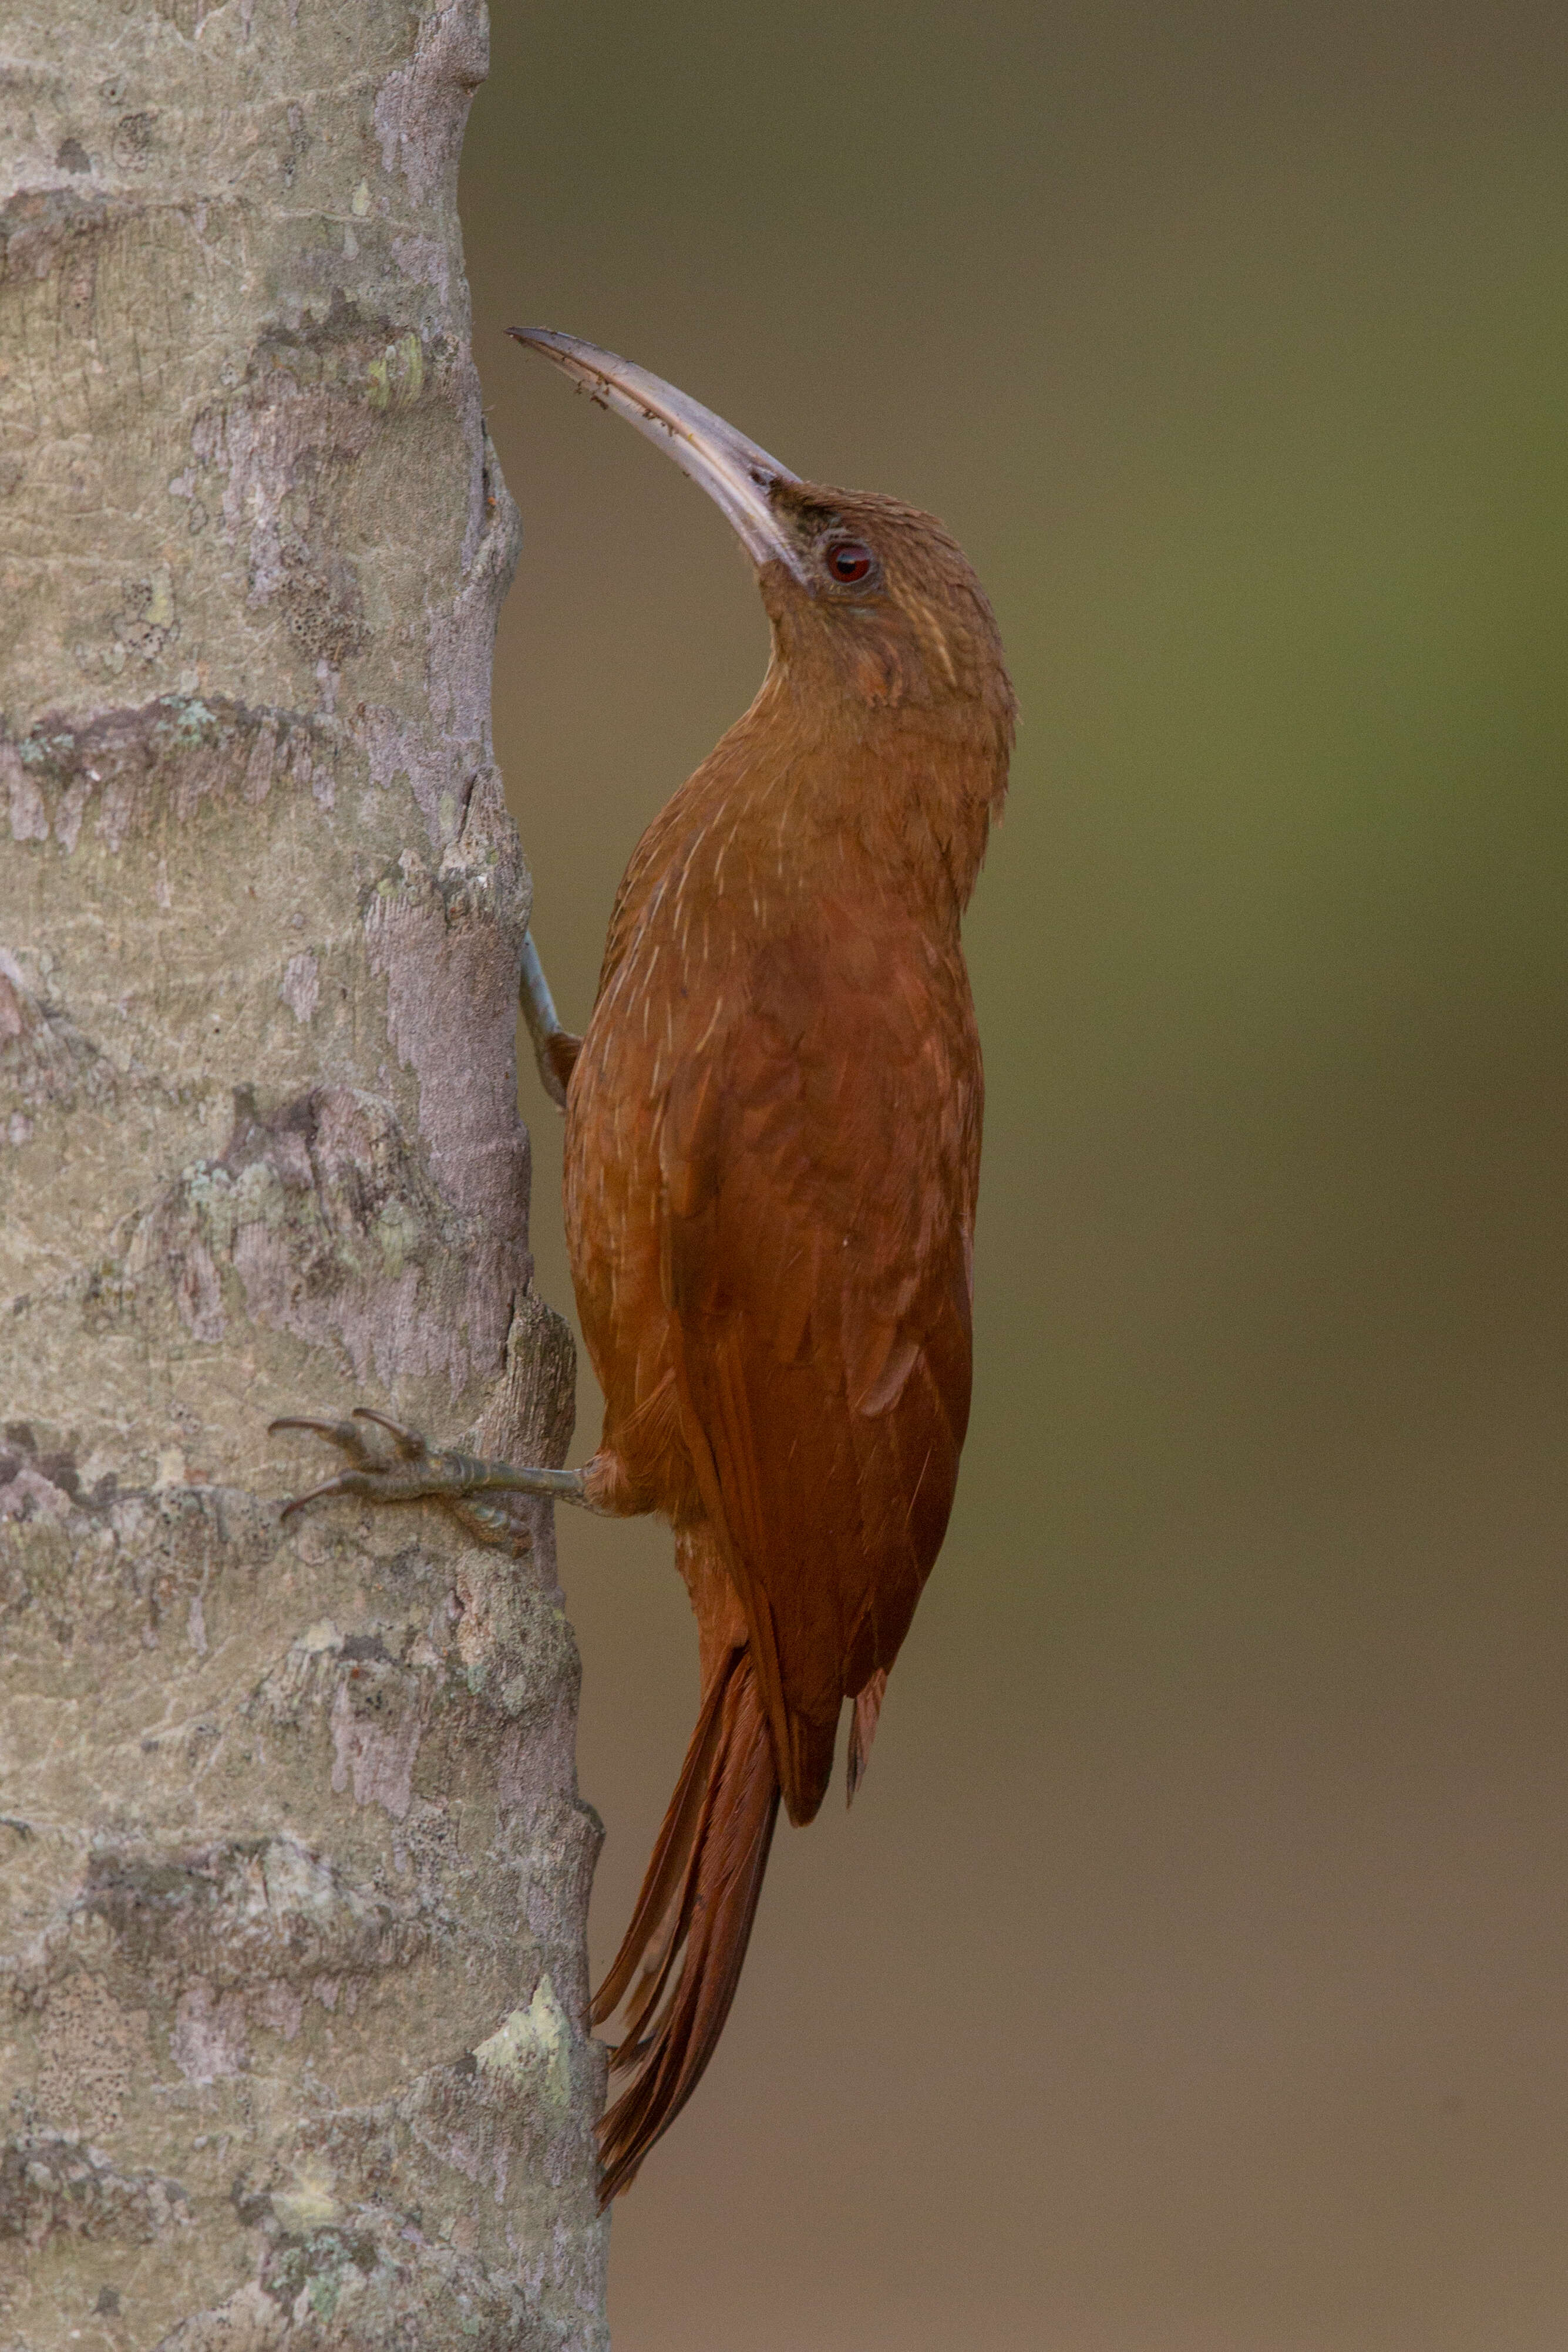 Image of Great Rufous Woodcreeper